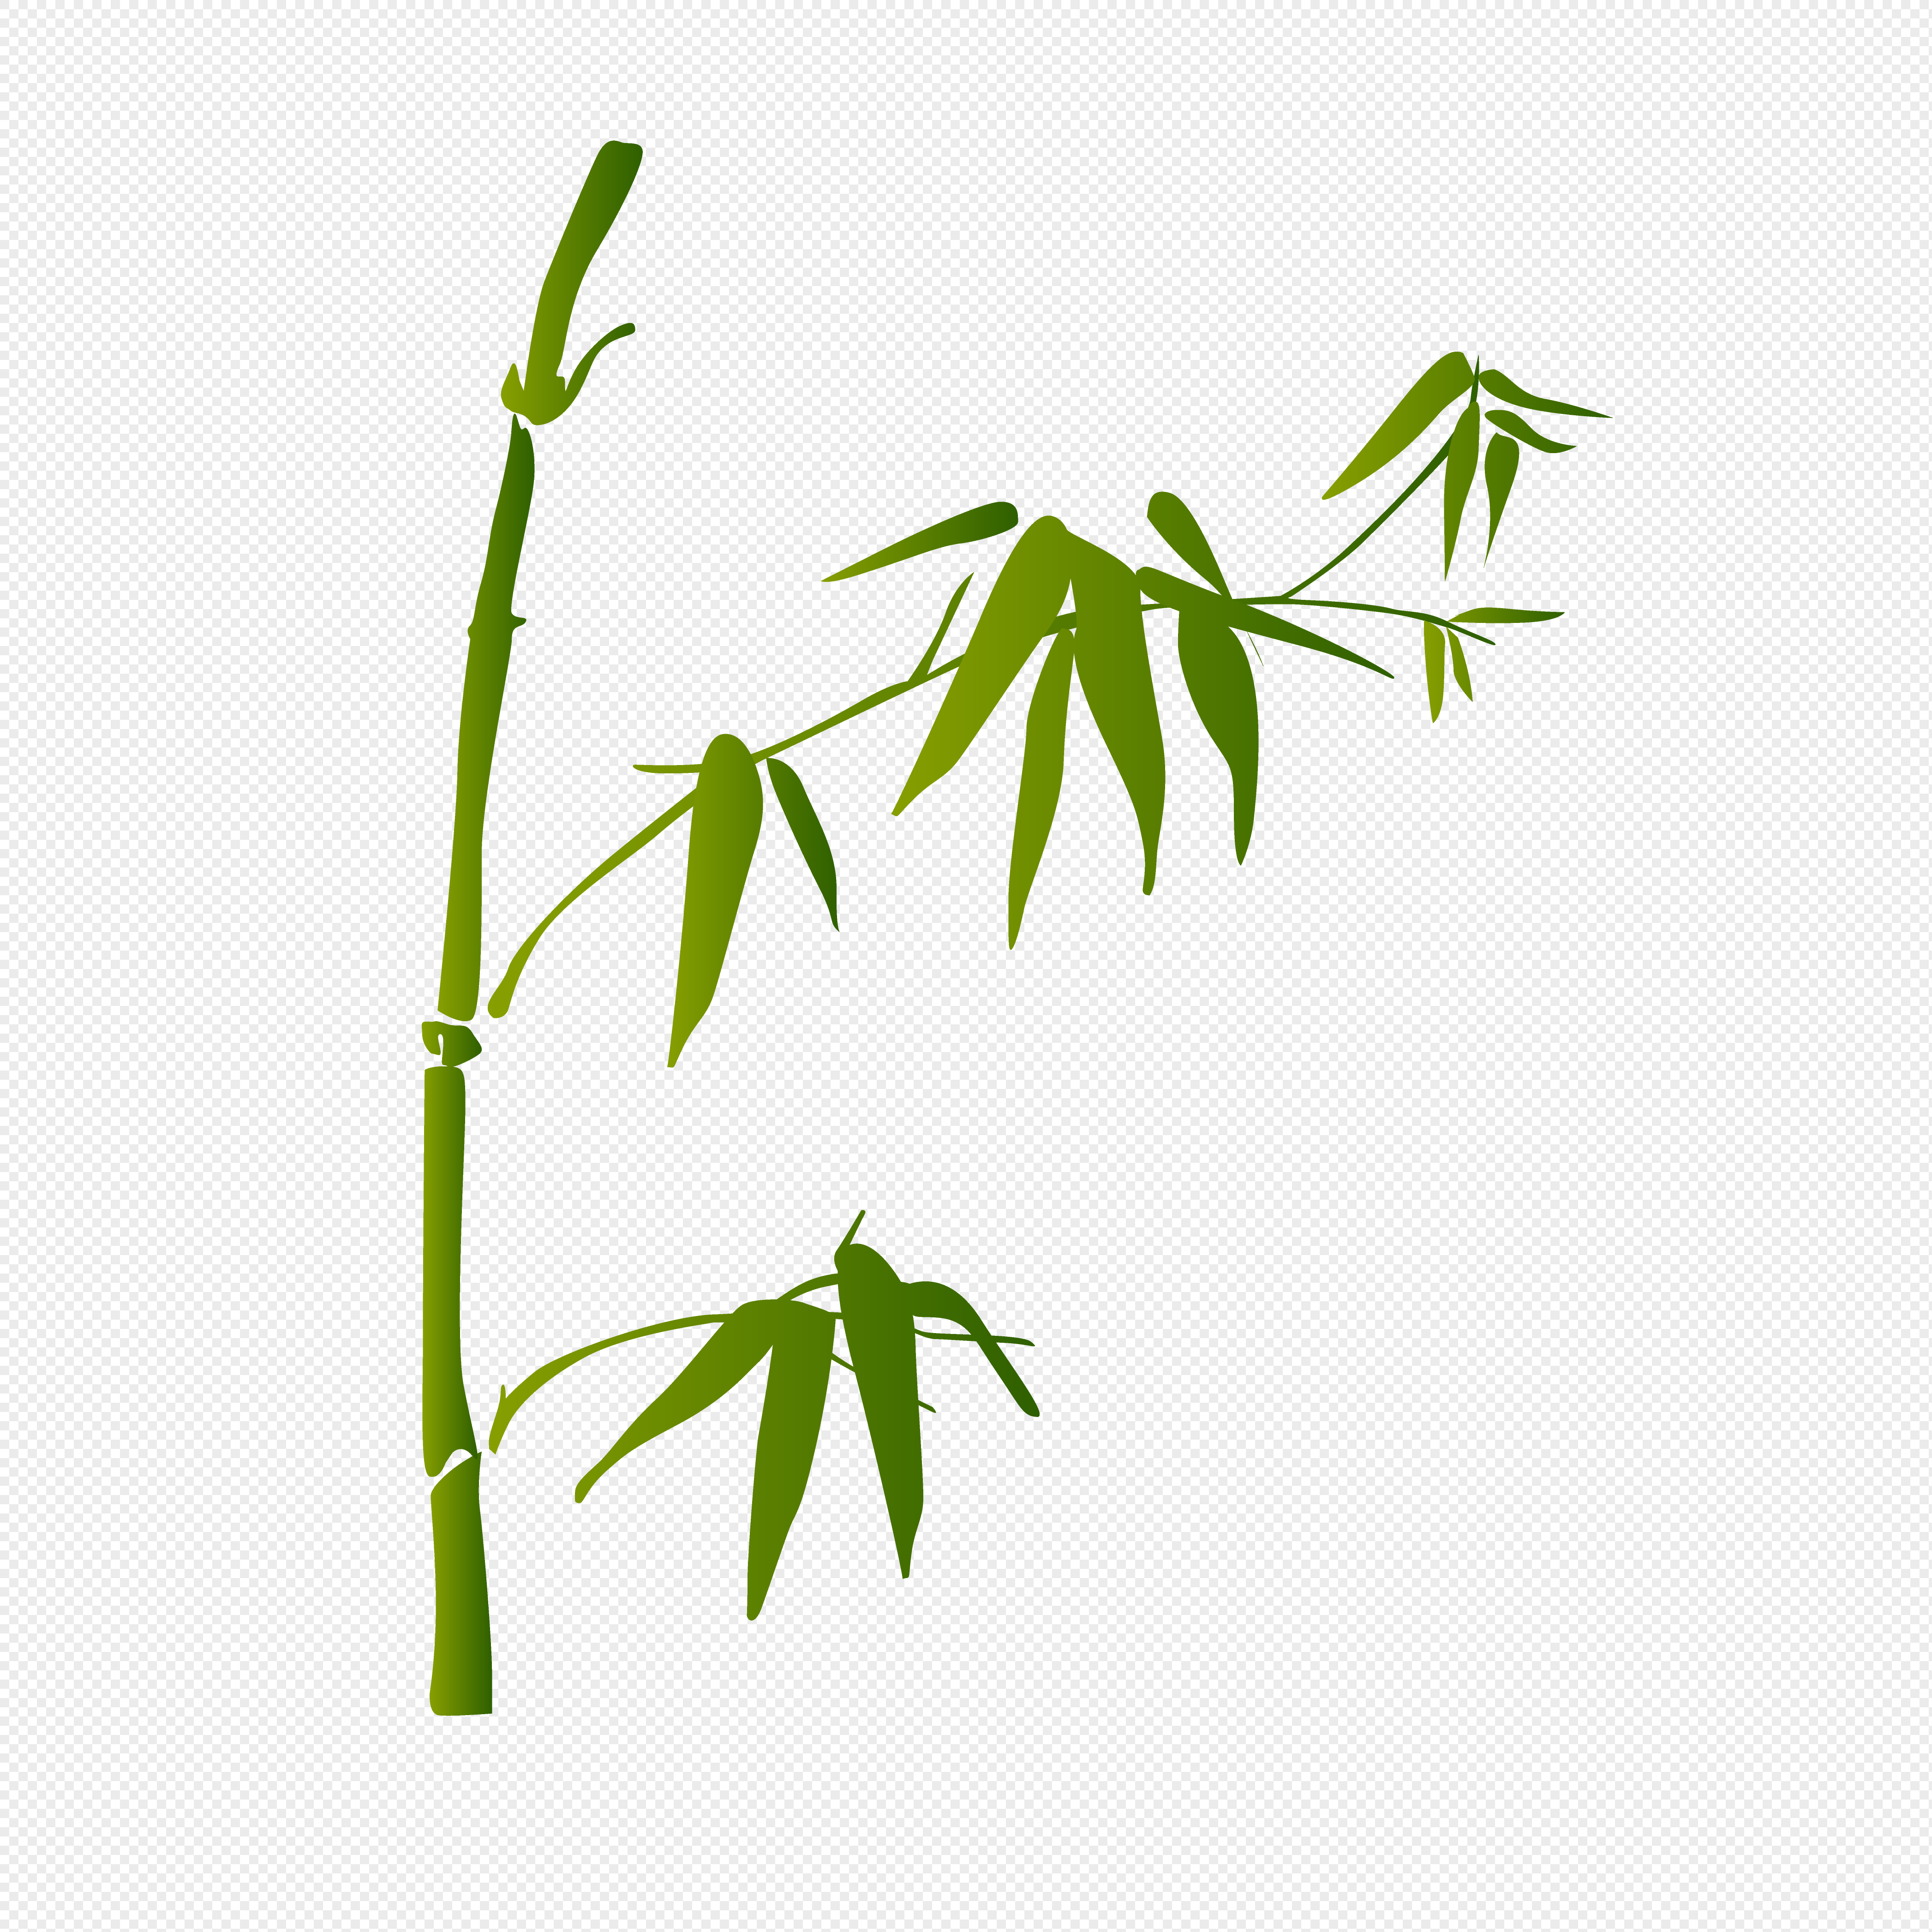 Simple flat bamboo vector material png image_picture free download